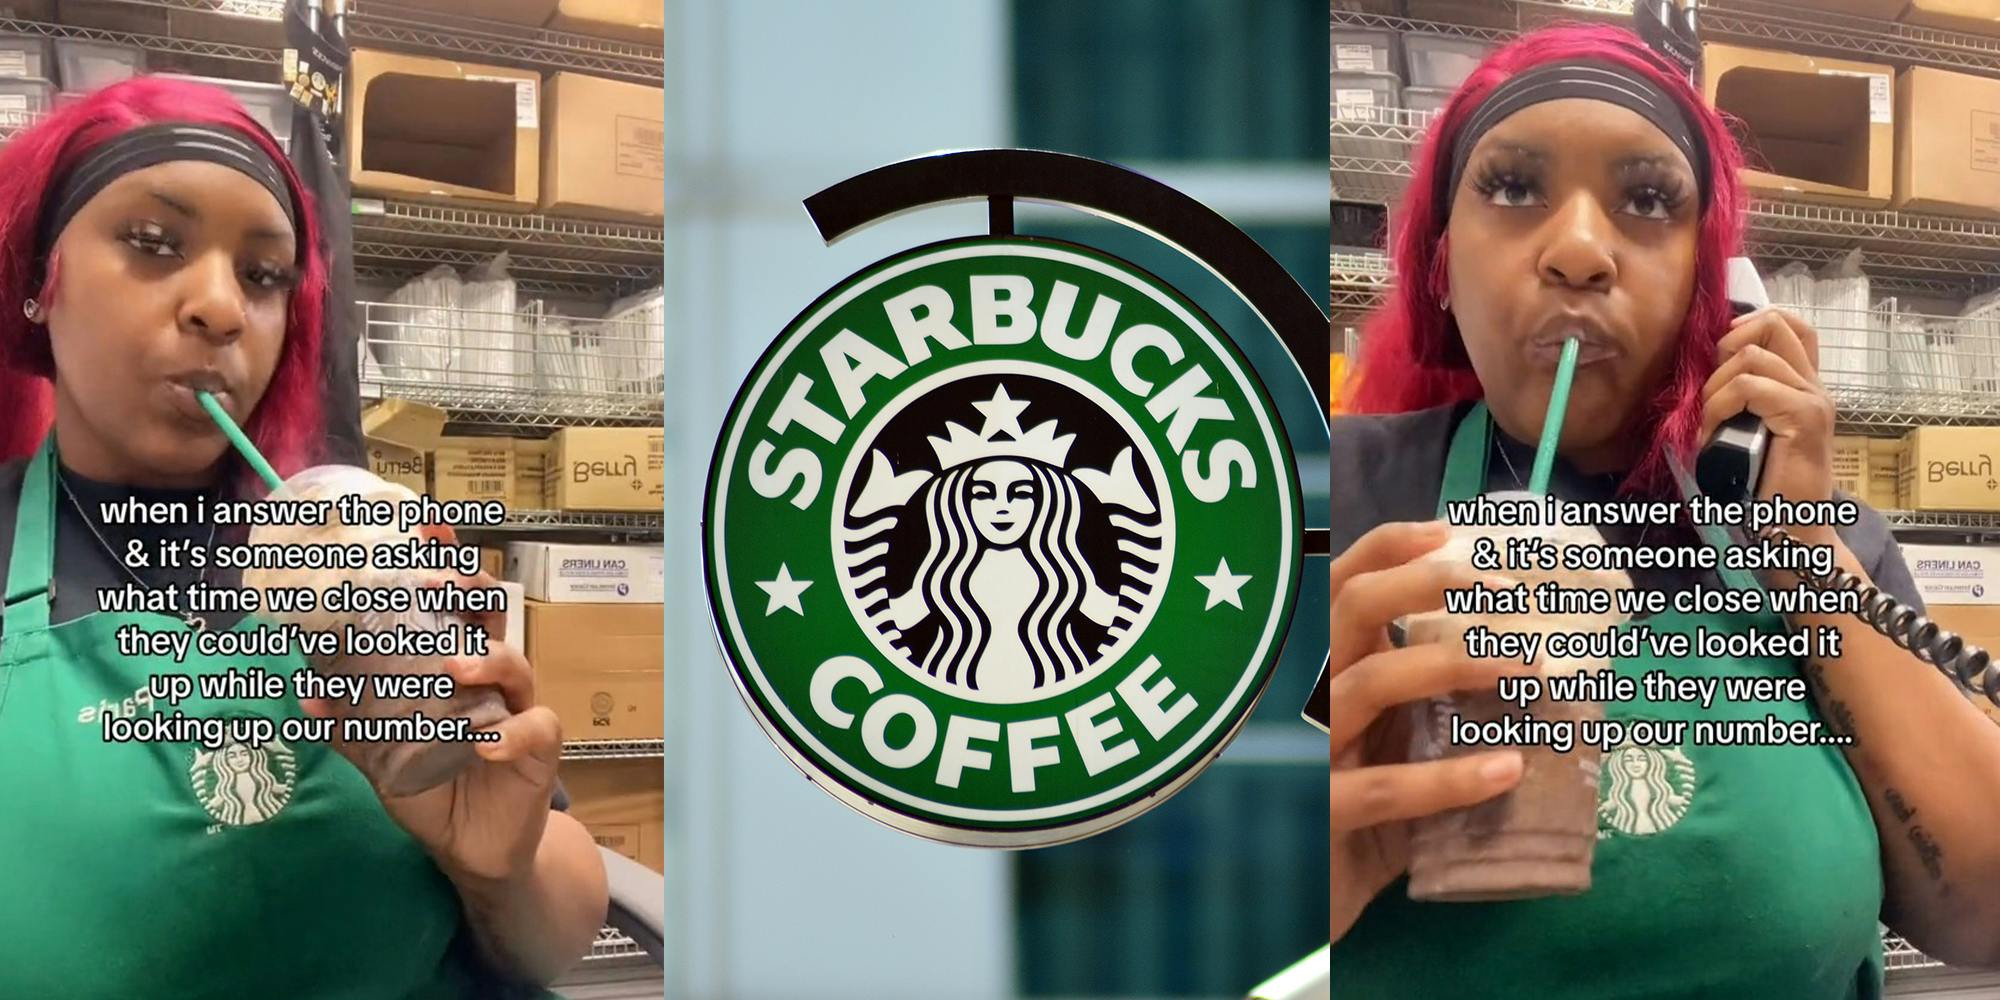 Starbucks barista complains about customers who call to find out closing time.